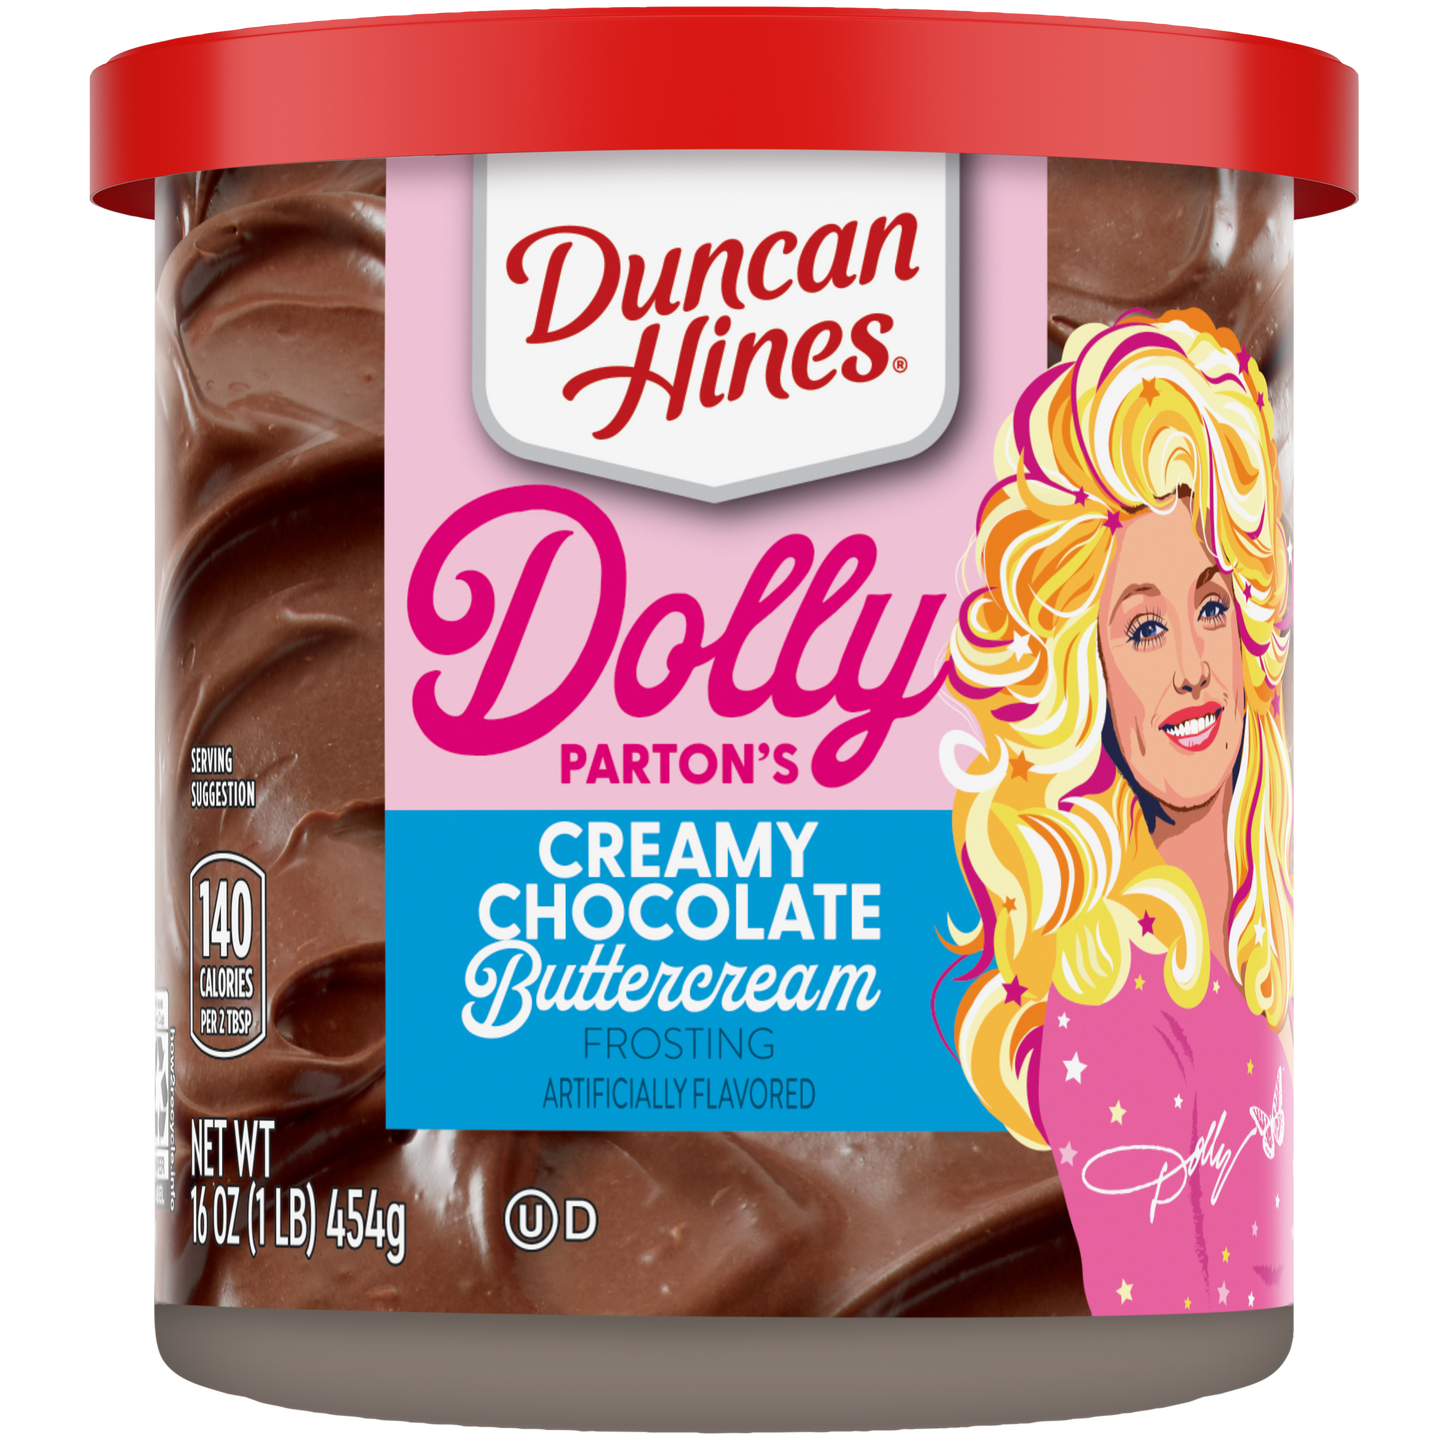 testing product - Dolly Parton Baking Collection